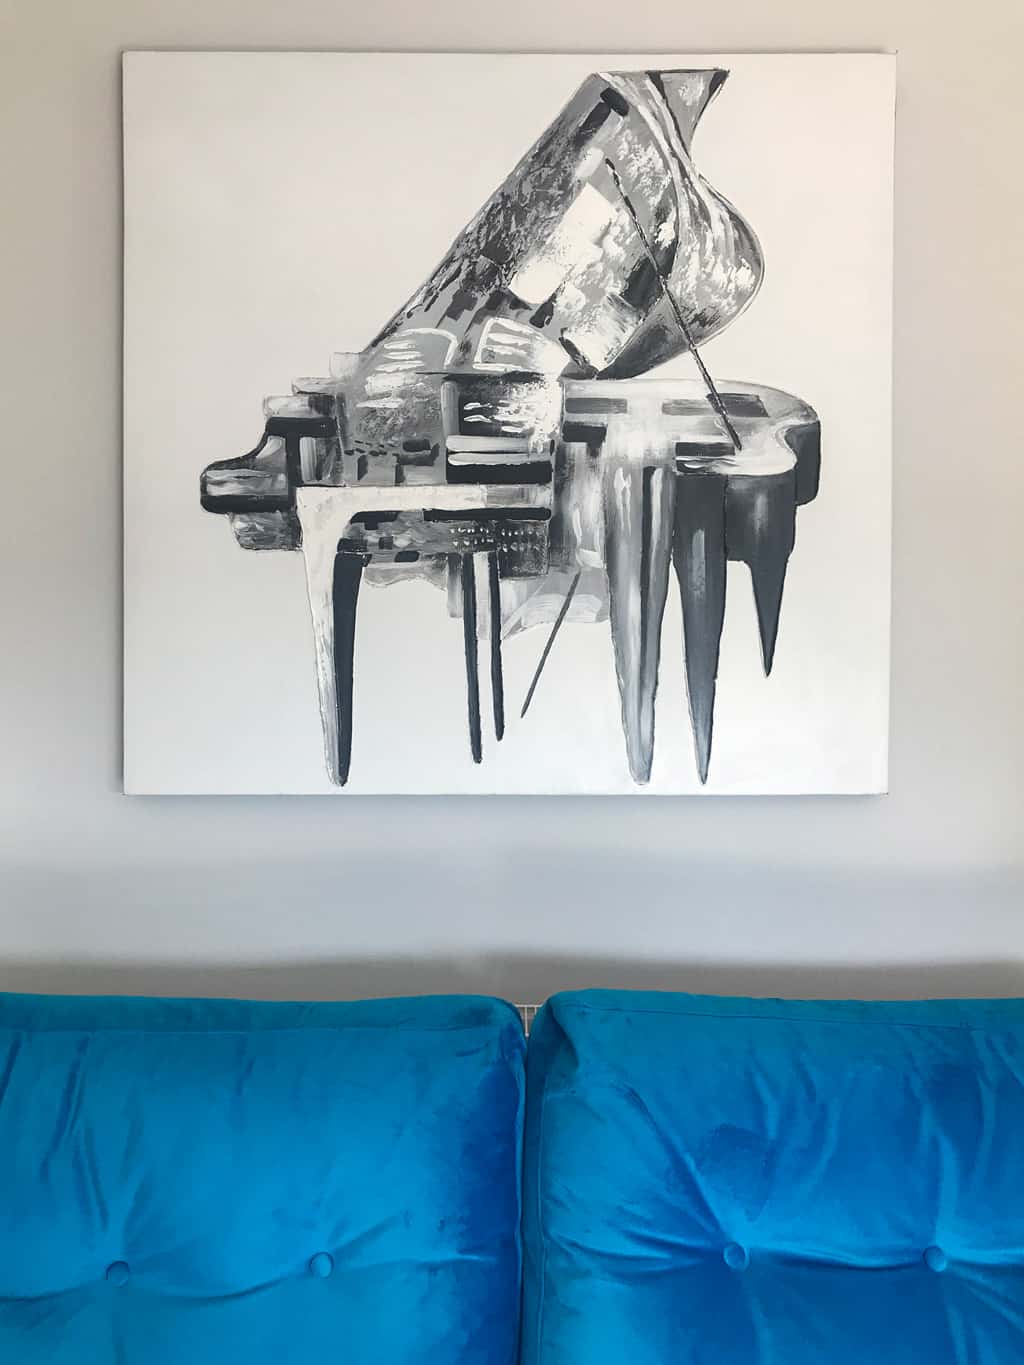 Monochrome Abstract Piano Wall Art Painting on Canvas